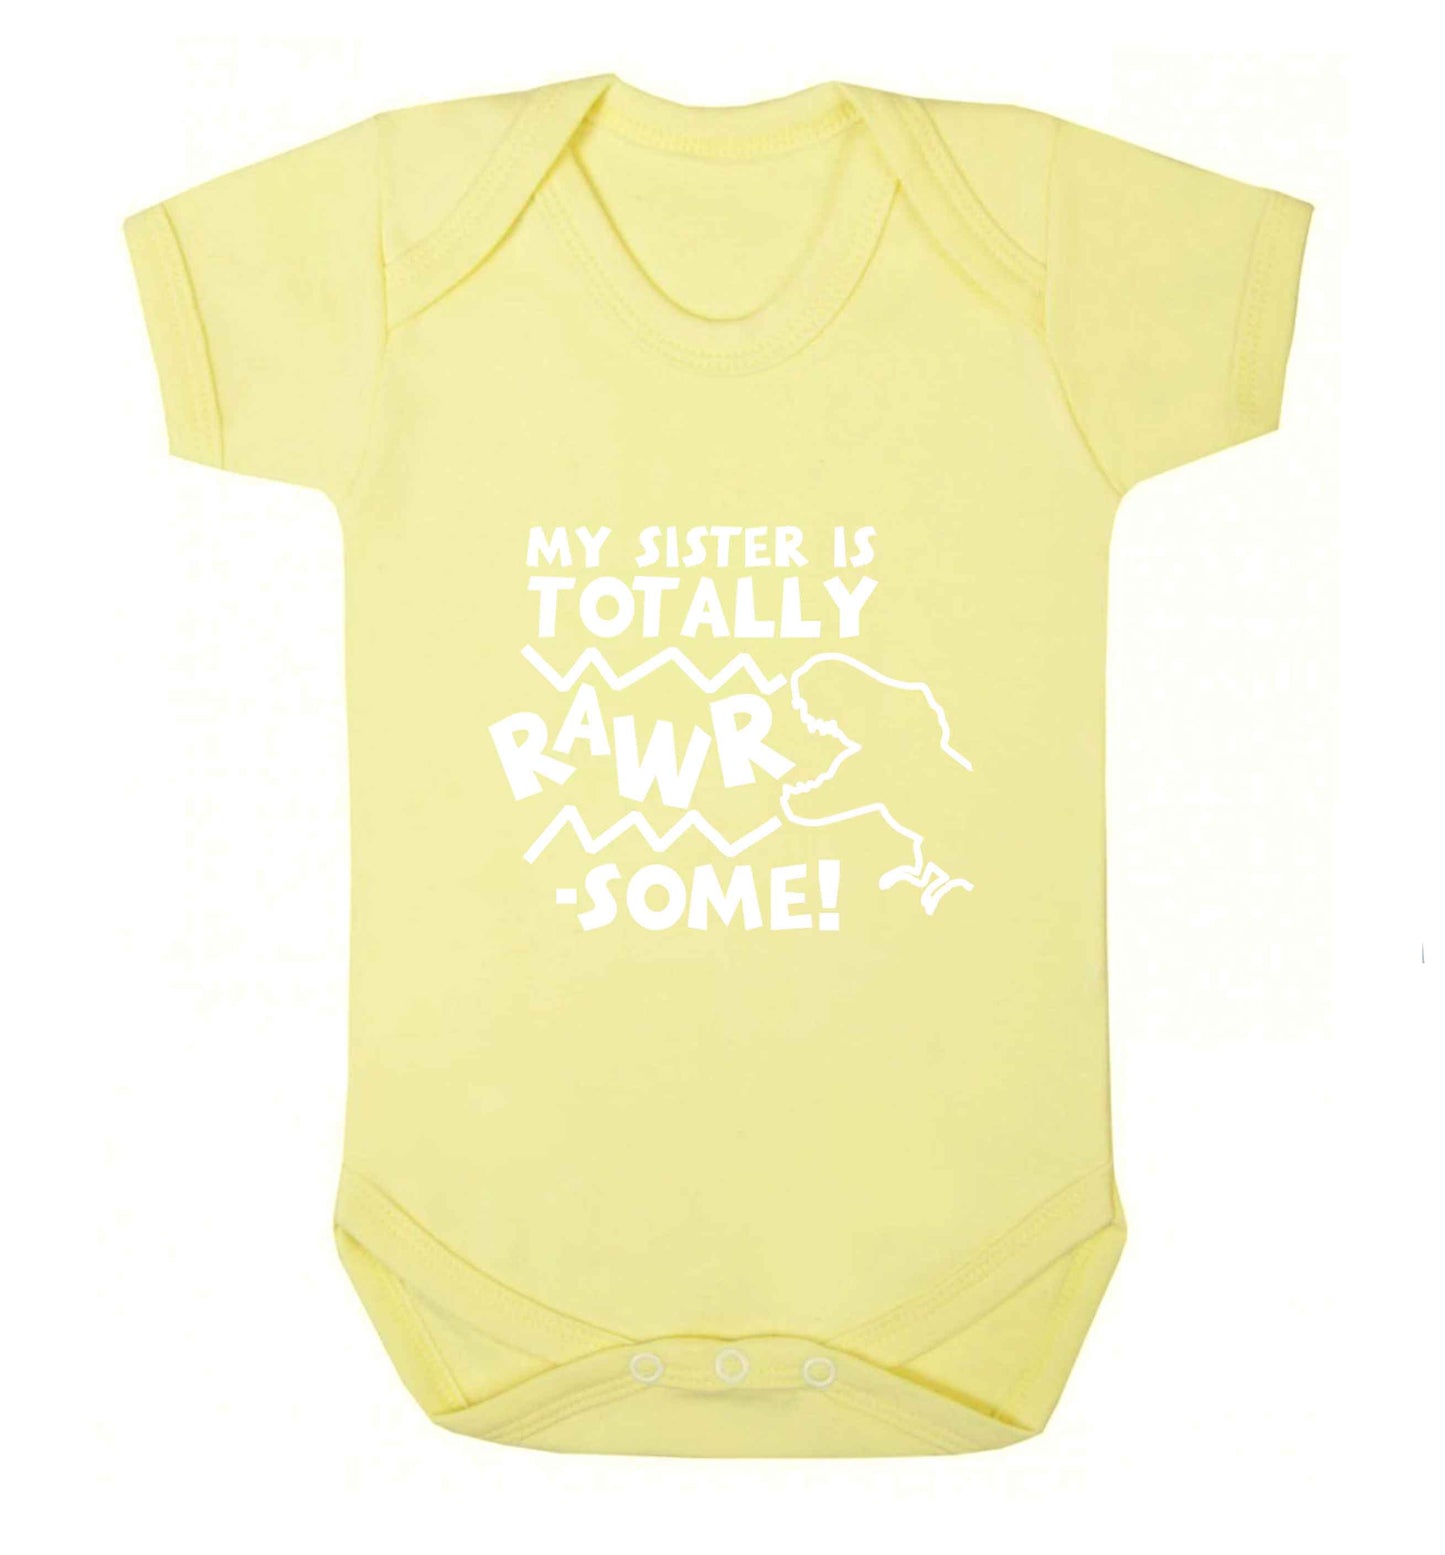 My sister is totally rawrsome baby vest pale yellow 18-24 months